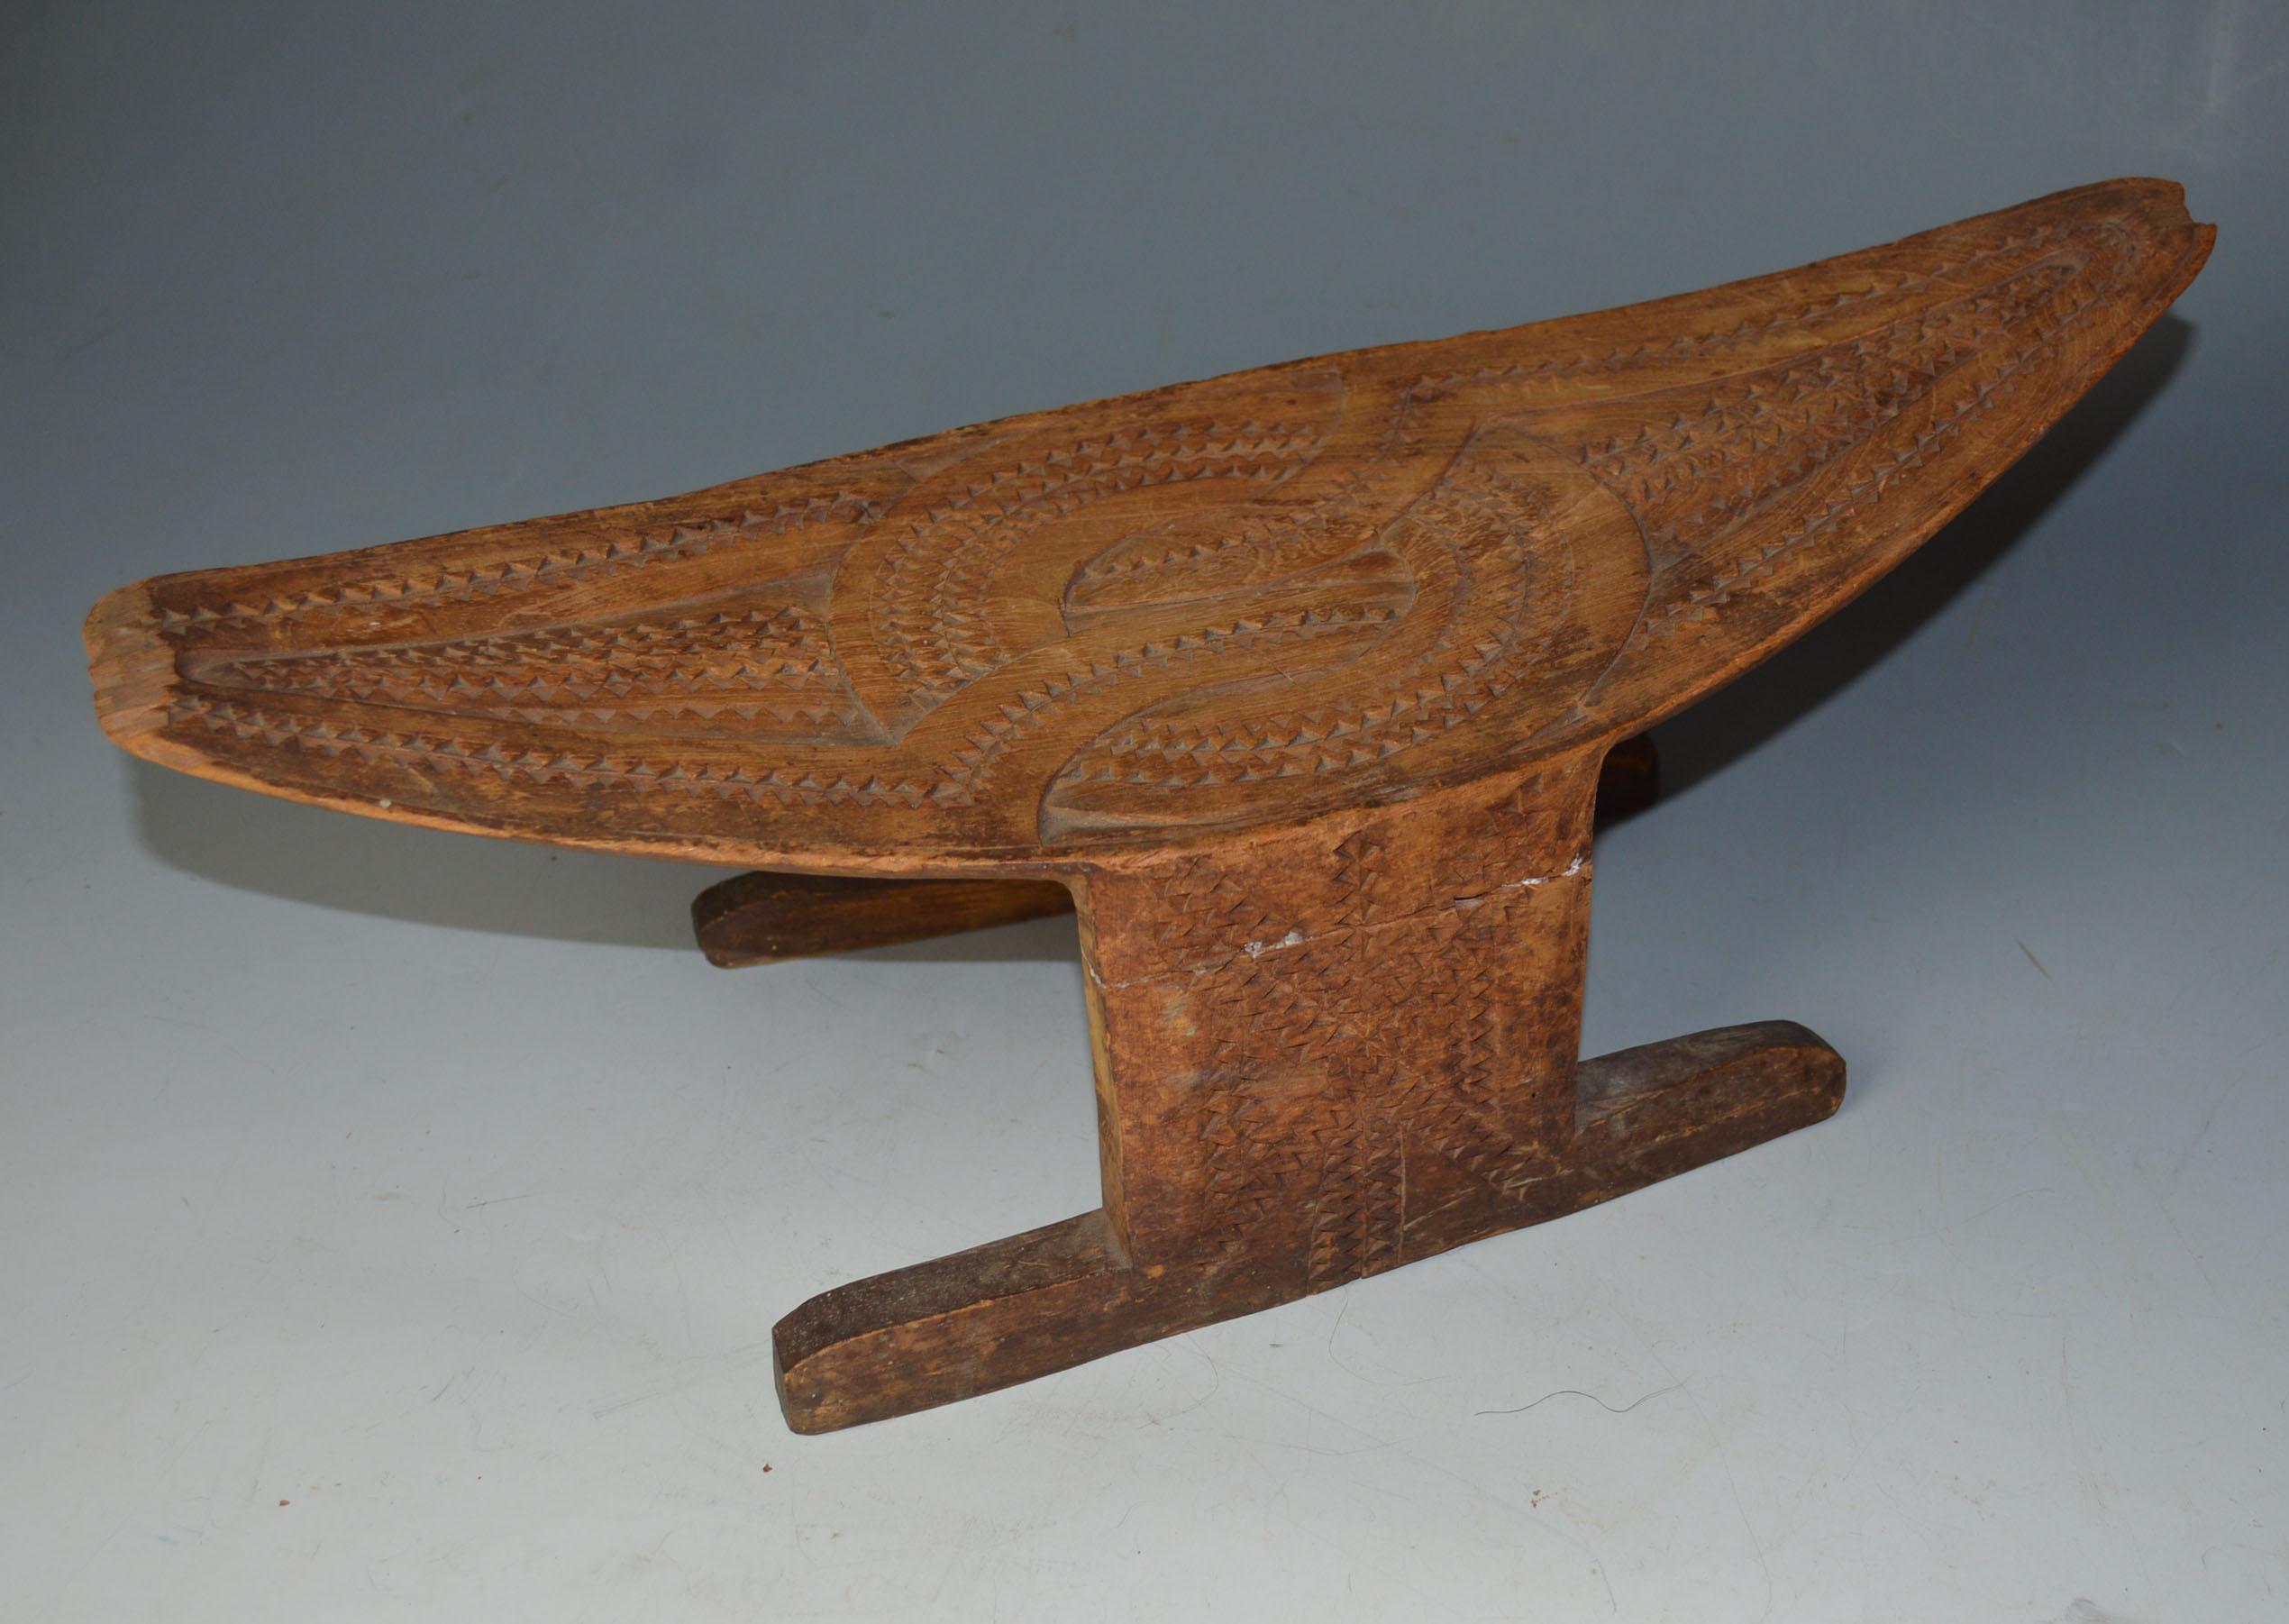 A fine vintage carved Suriname stool with geometric carved decoration, Tribal South Latin American Antiques
 
Suriname South America
Measures: 18 cm height, 51 cm length
Condition: old repairs to legs
Ex missionary collection
Period early 20th